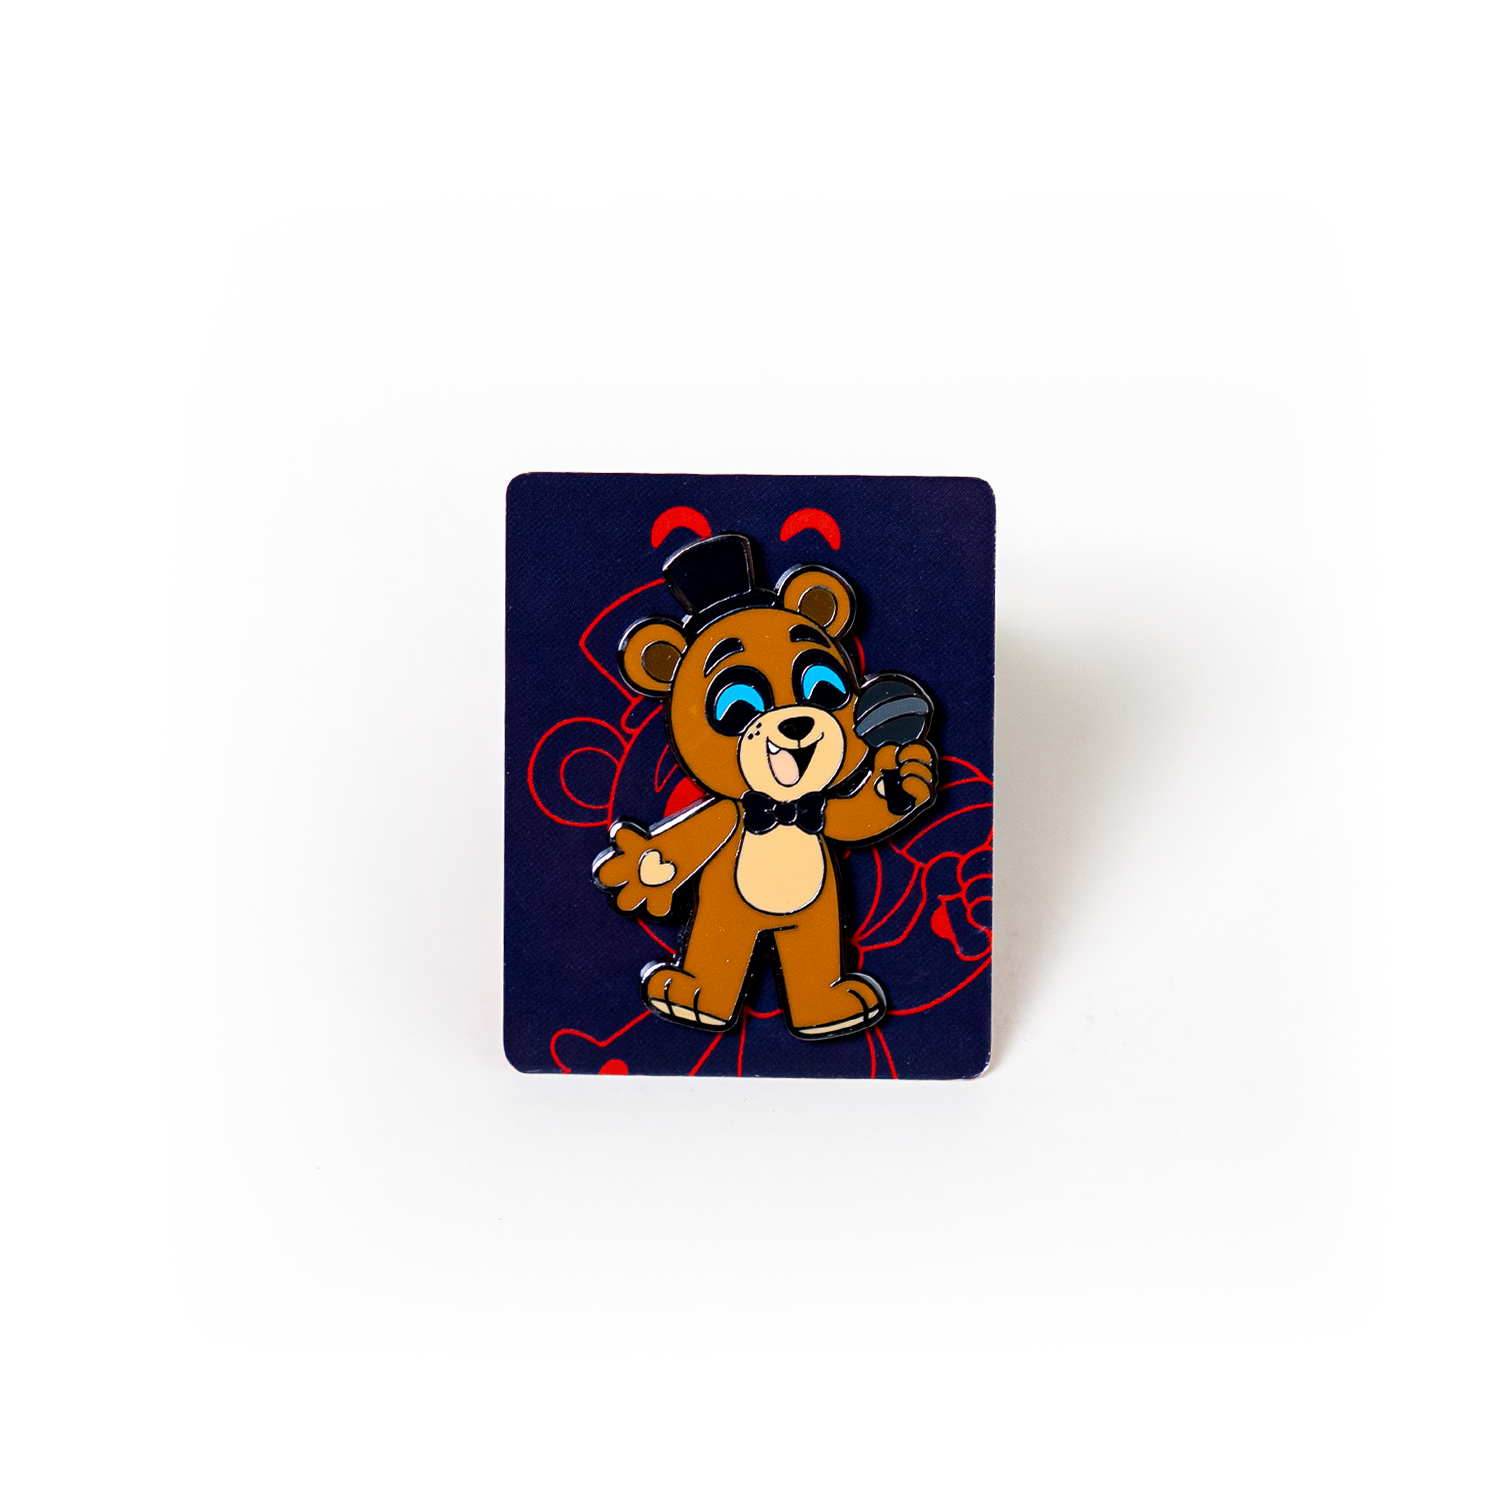  Youtooz Five Nights At Freddy's Pin Set, Official Licensed FNAF  Pins, Collectors Box Includes 6 Pins By Youtooz Five Nights At Freddy's  Collection : Clothing, Shoes & Jewelry